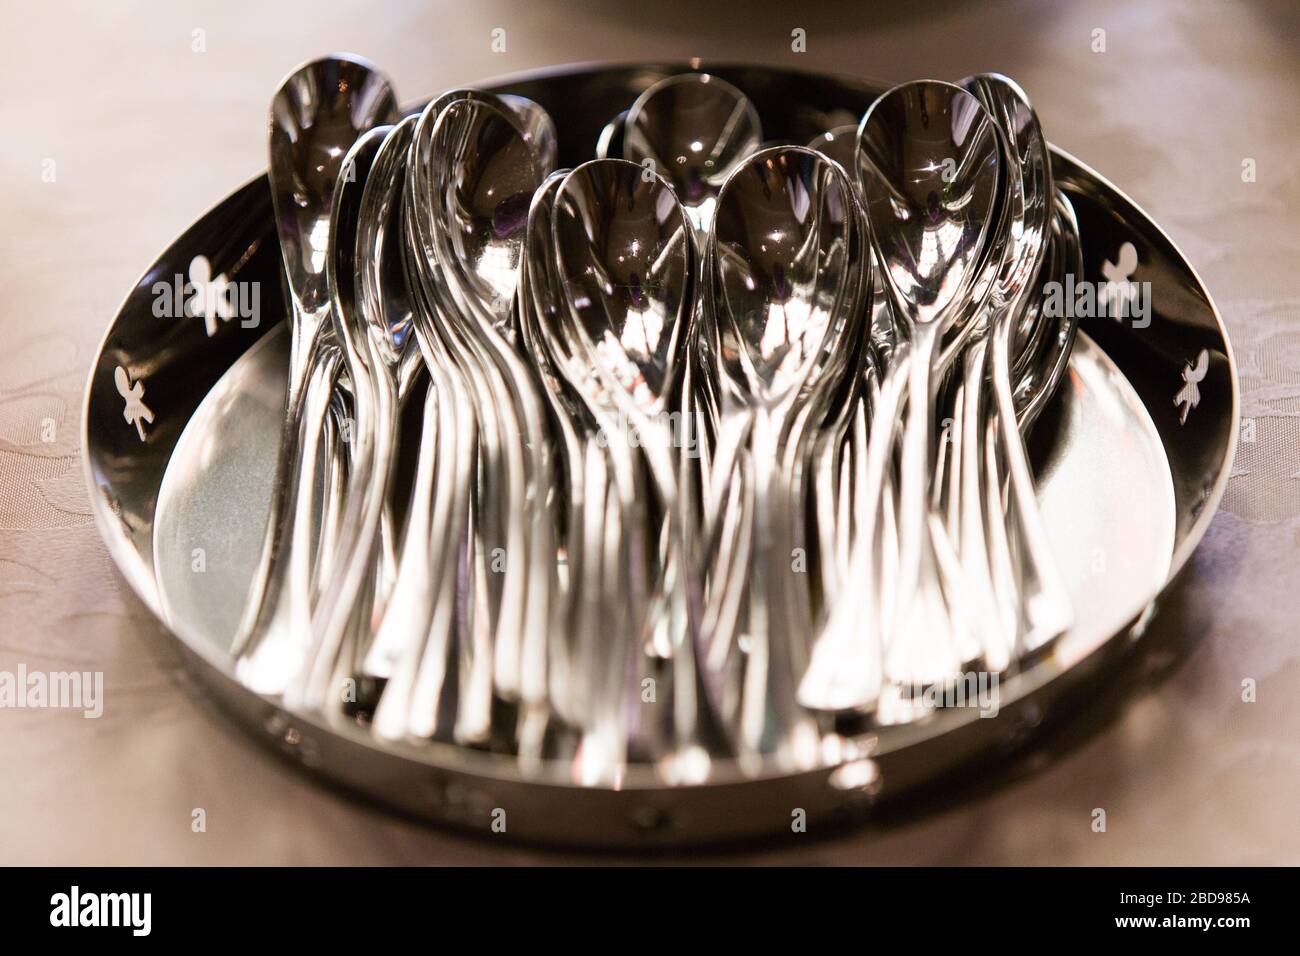 A tray of dessert silver spoons Stock Photo